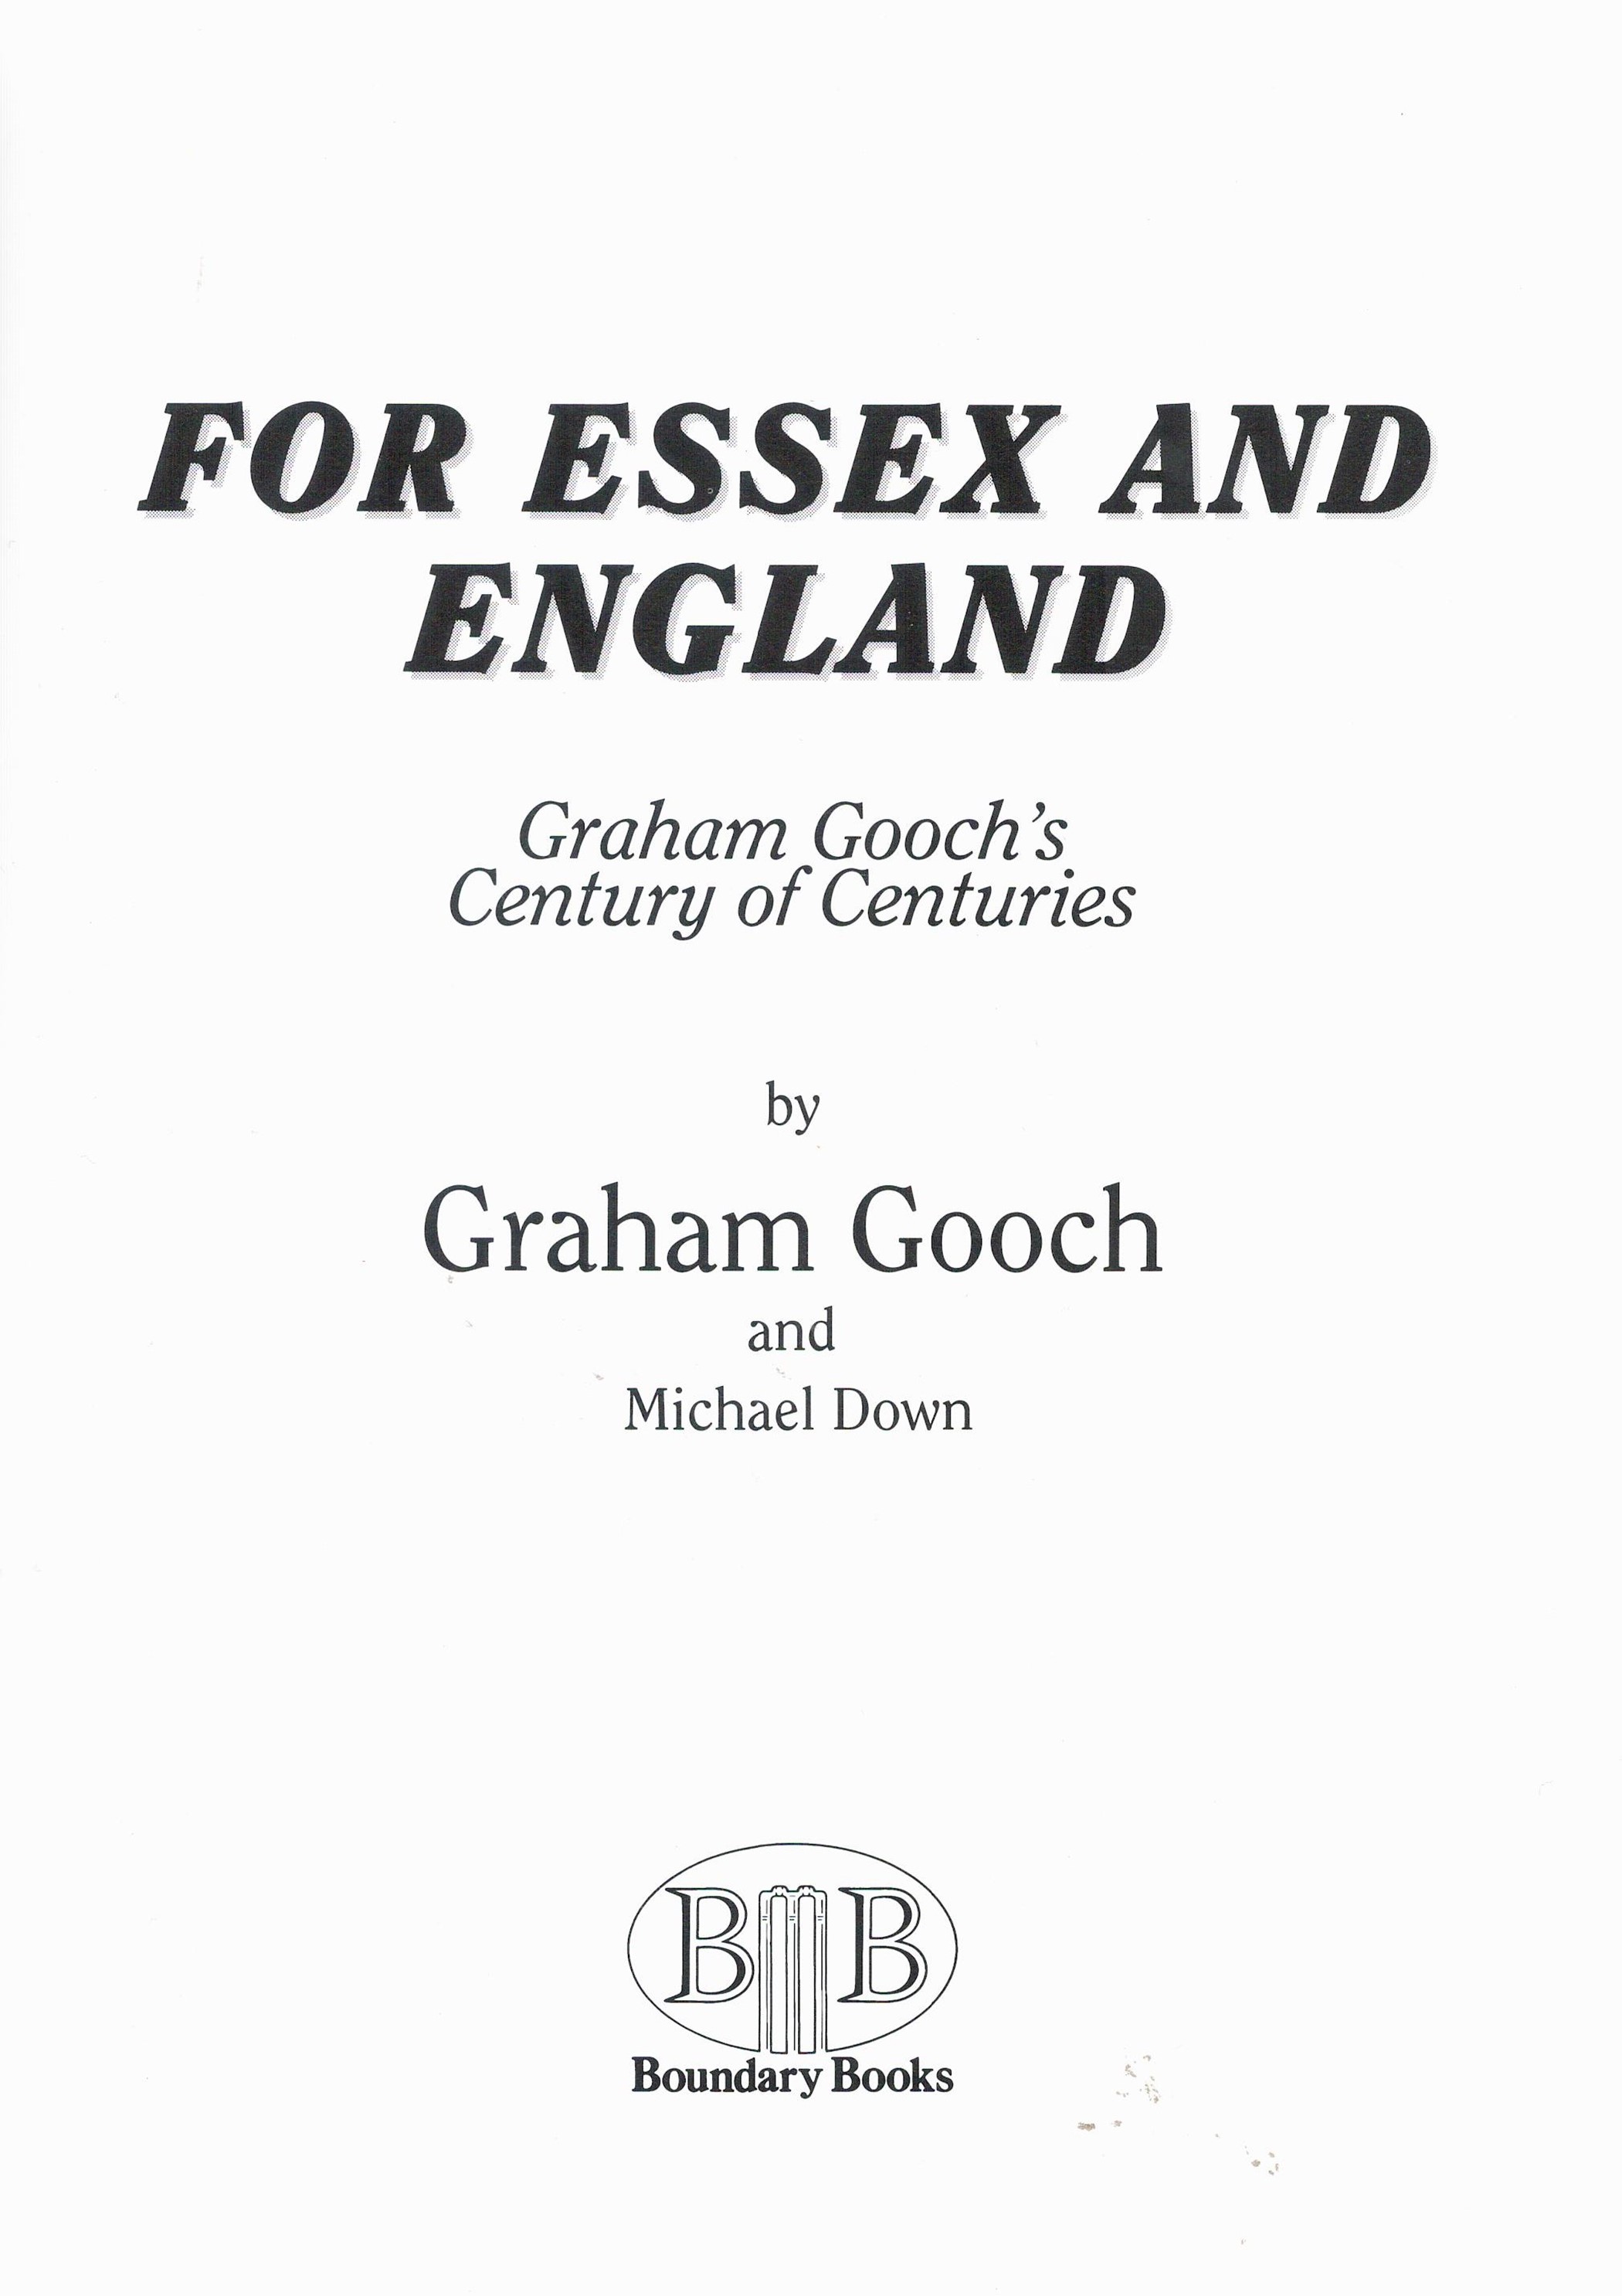 Signed Book Graham Gooch For Essex and England First Edition 1993 Hardback Book Limited Edition No - Image 4 of 5